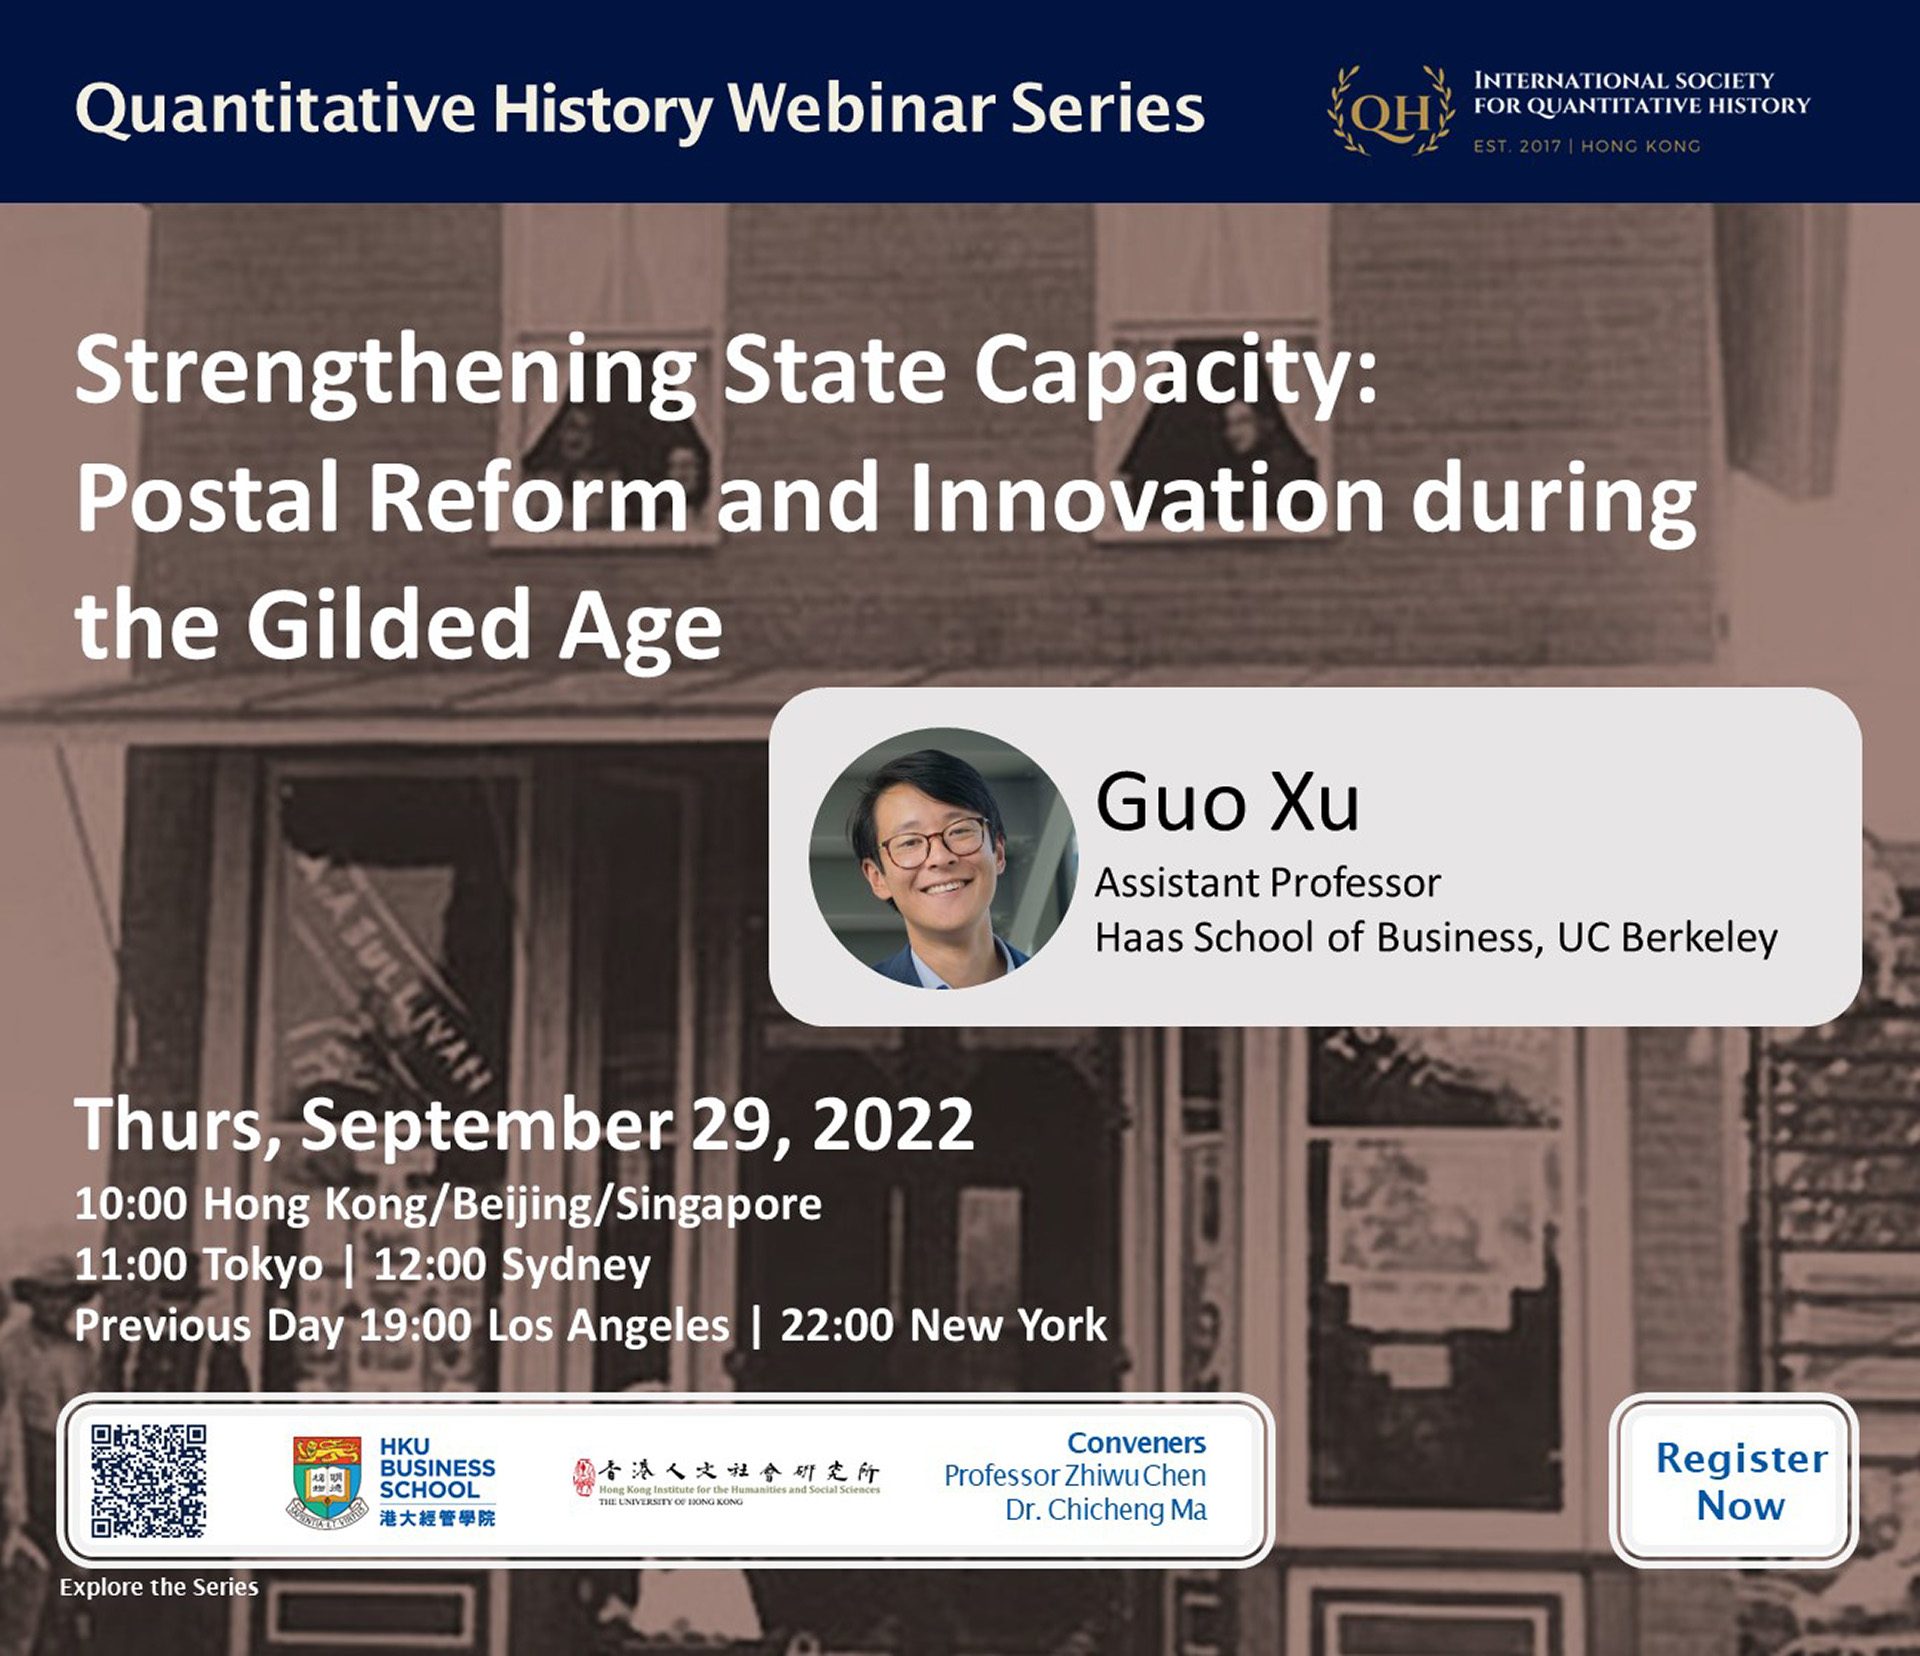 Quantitative History Webinar on “Strengthening State Capacity: Postal Reform and Innovation during the Gilded Age” by Dr. Guo Xu (September 29, 2022)